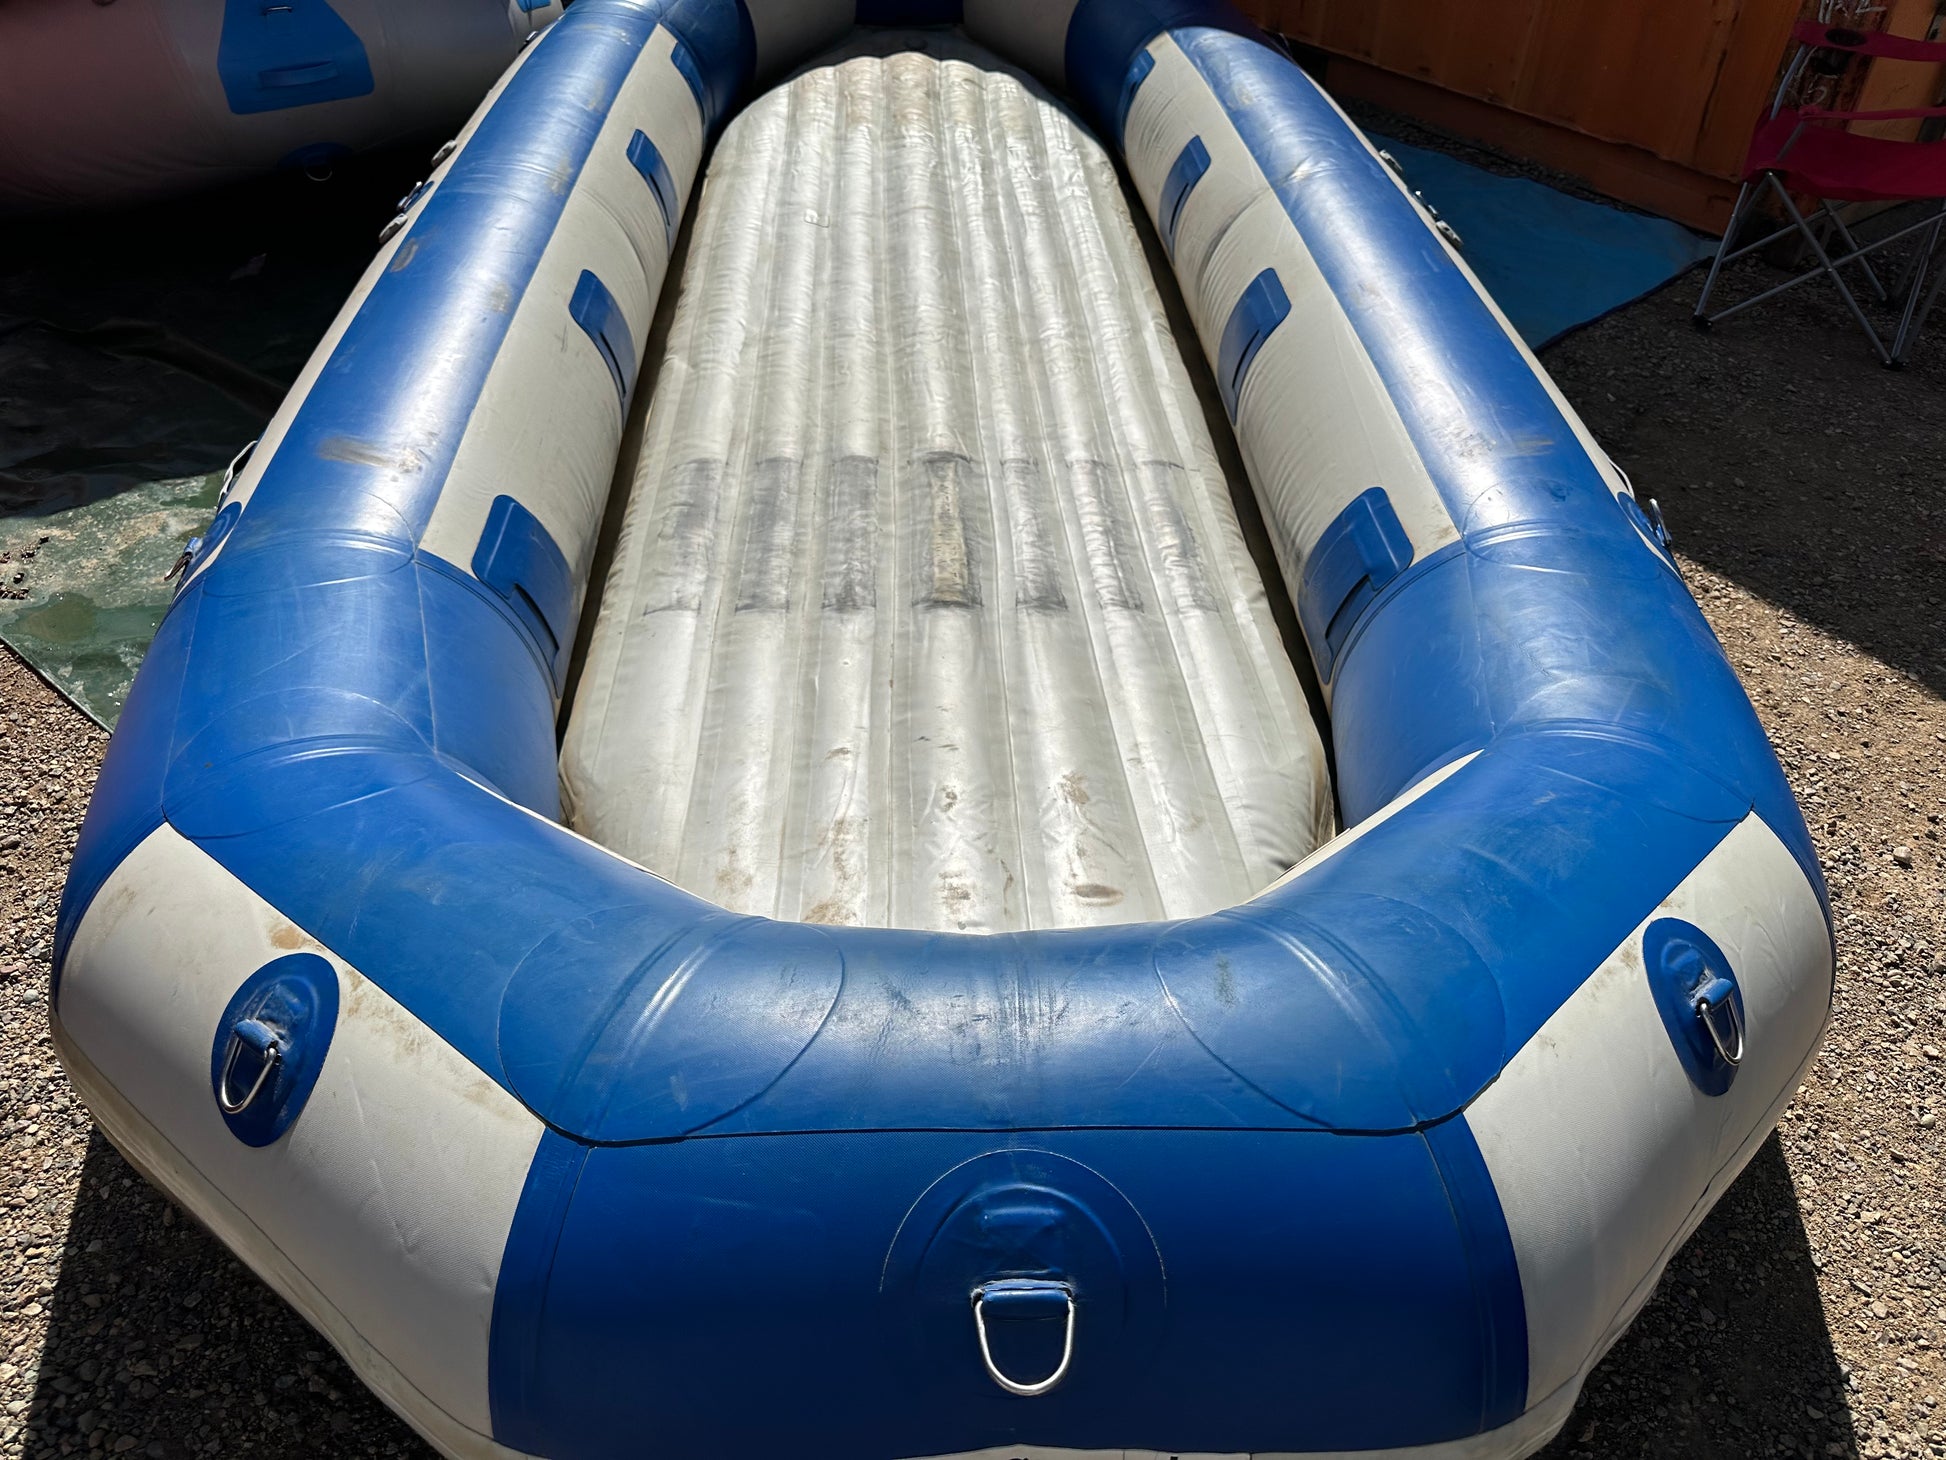 A used blue and white 16' 4CRS Vanguard raft in fair condition sitting on the ground.